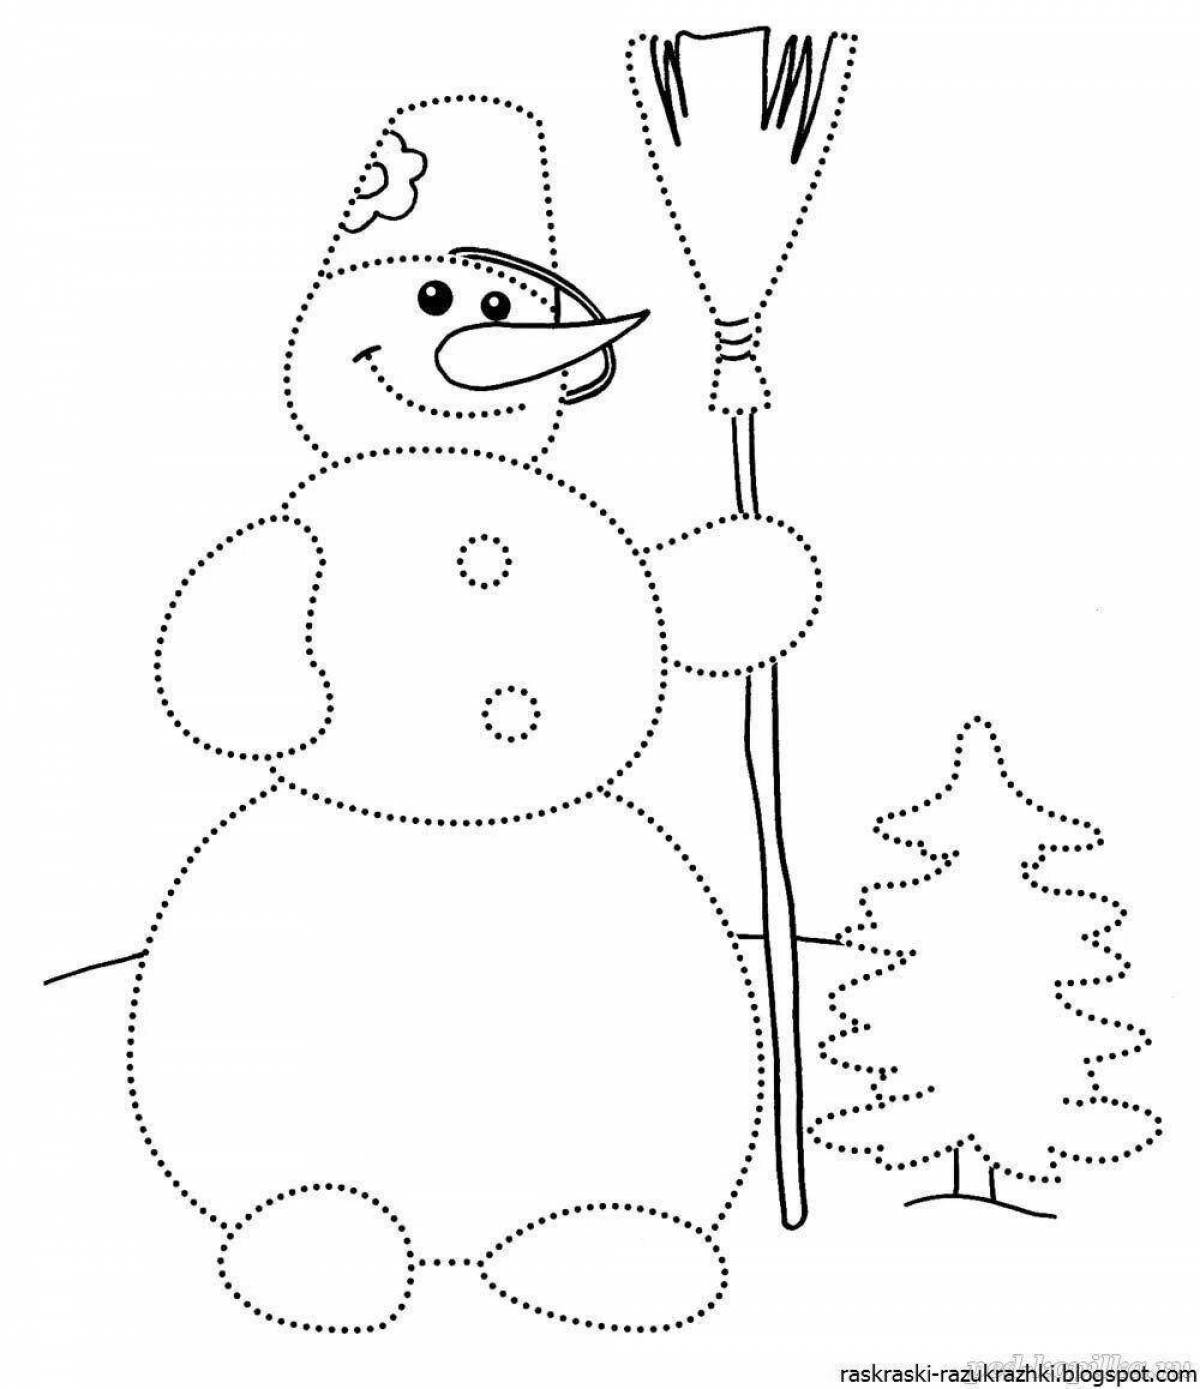 Colour-obsessed snowman coloring book for kids 3 4